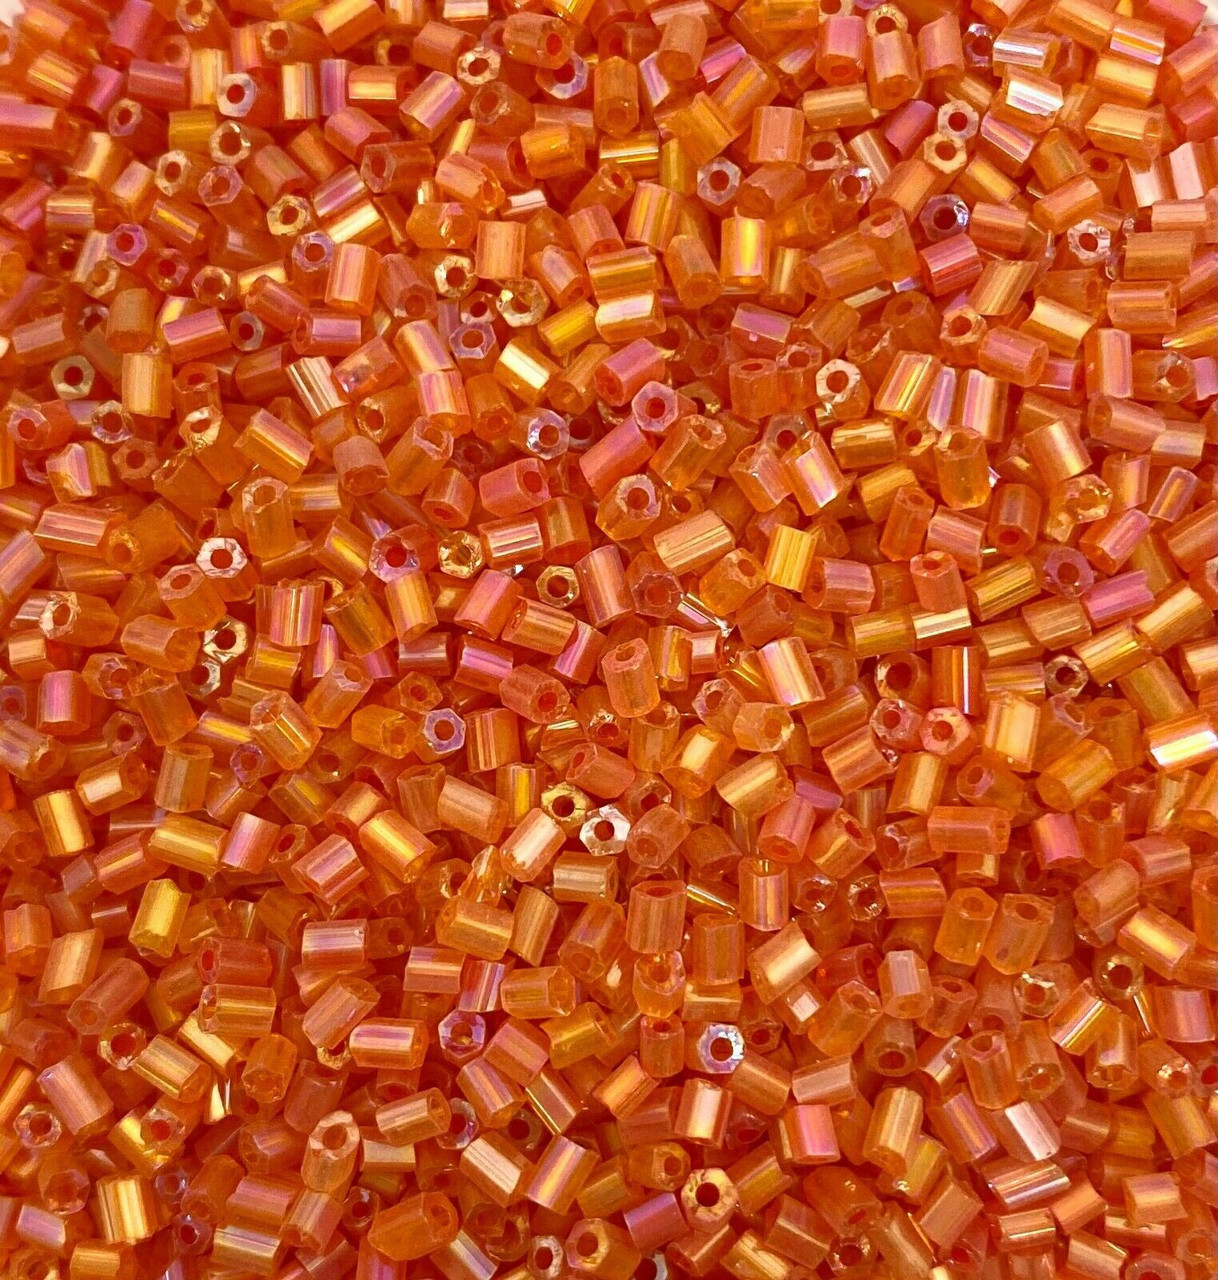 50g glass HEX seed beads - Orange Rainbow, size 11/0 (approx 2mm)